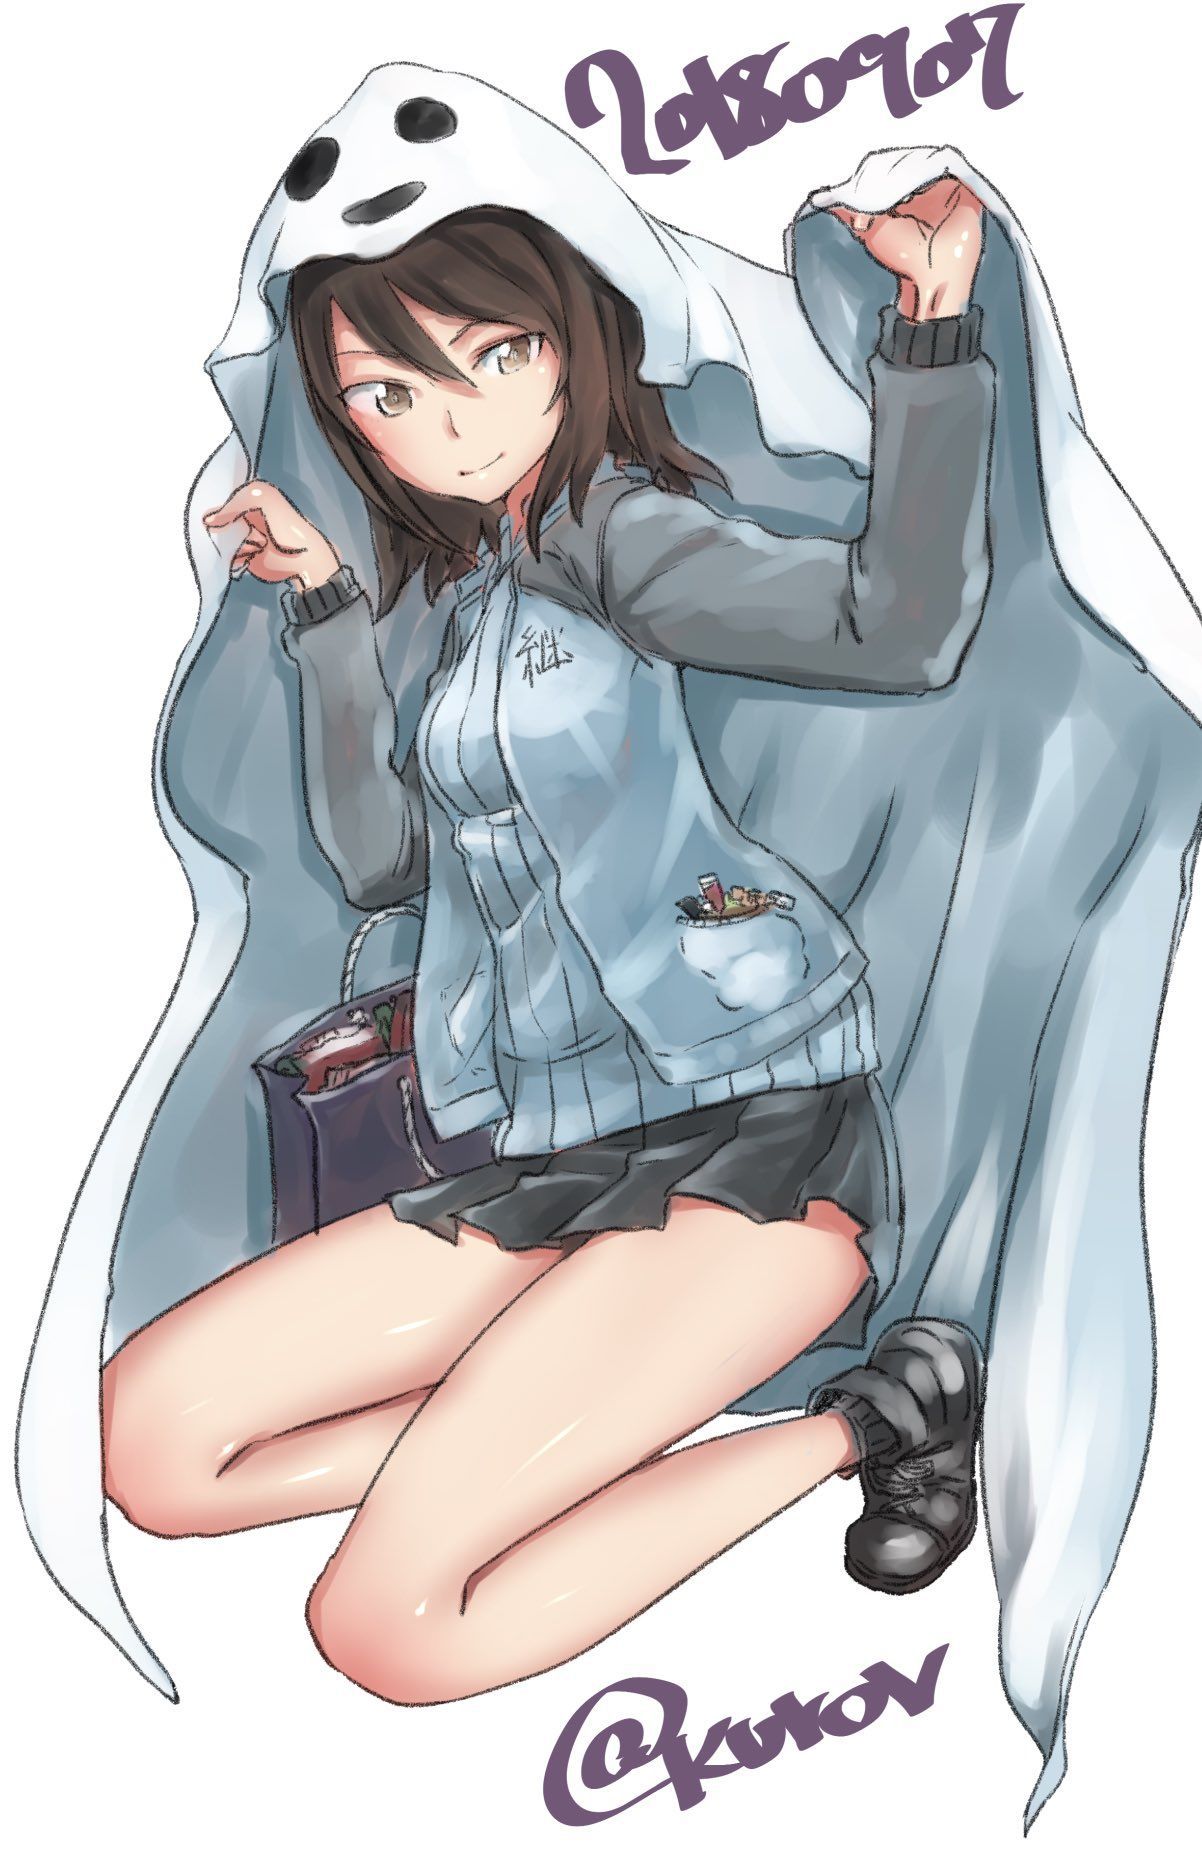 【Erotic Image】Mika's character image that you want to refer to the erotic cosplay of Girls &amp; Panzer 24